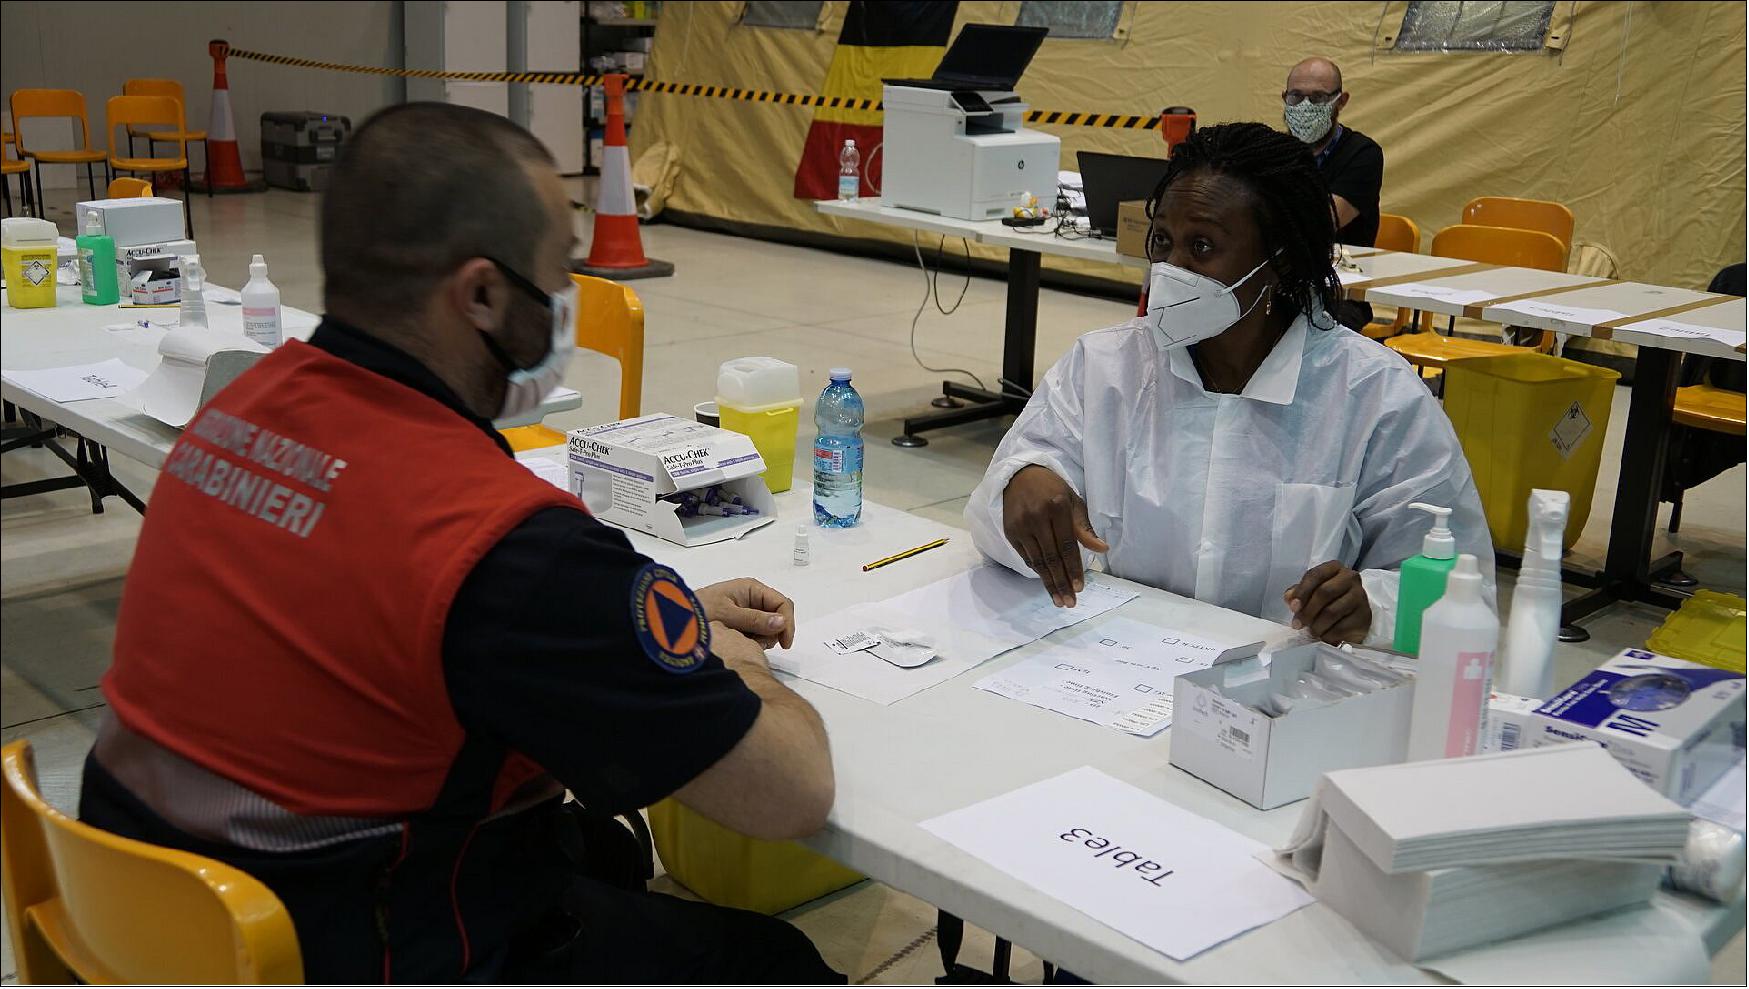 Figure 1: An ESA-backed mobile field laboratory set up at Piedmont is enabling the Italian authorities to test thousands of key workers for COVID-19. Some of the tests carried out there take just a few minutes, instead of a few hours. Key workers who have a negative antibody test or a positive antibody test followed by a negative swab can then return to work quickly, supporting the economic recovery (image credit: ESA)